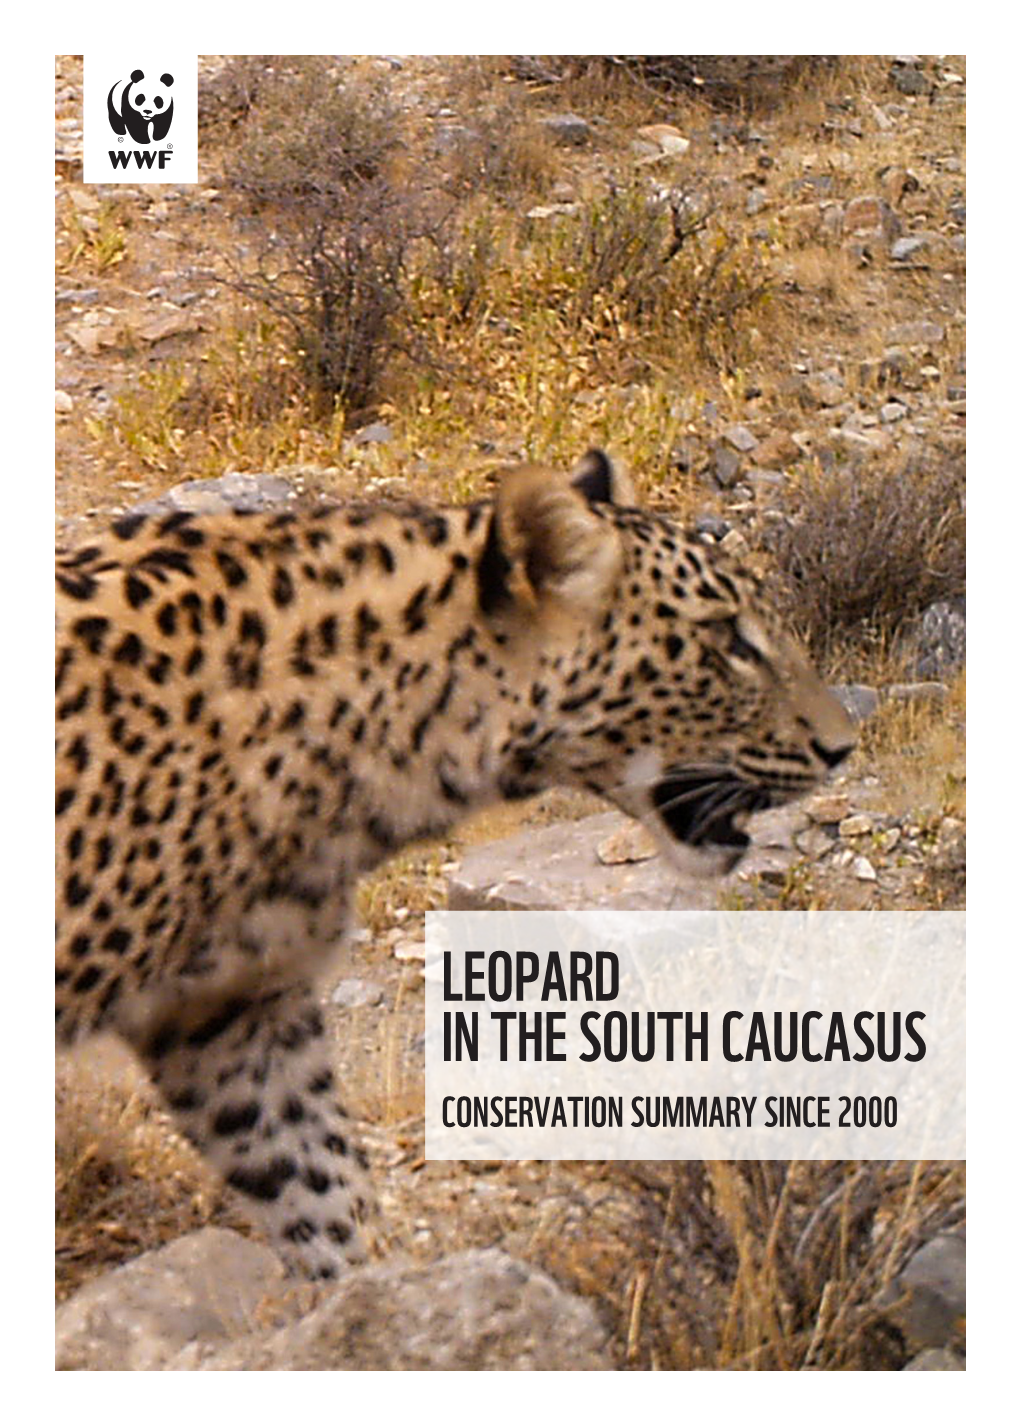 LEOPARD in the SOUTH CAUCASUS CONSERVATION SUMMARY SINCE 2000 Text: N